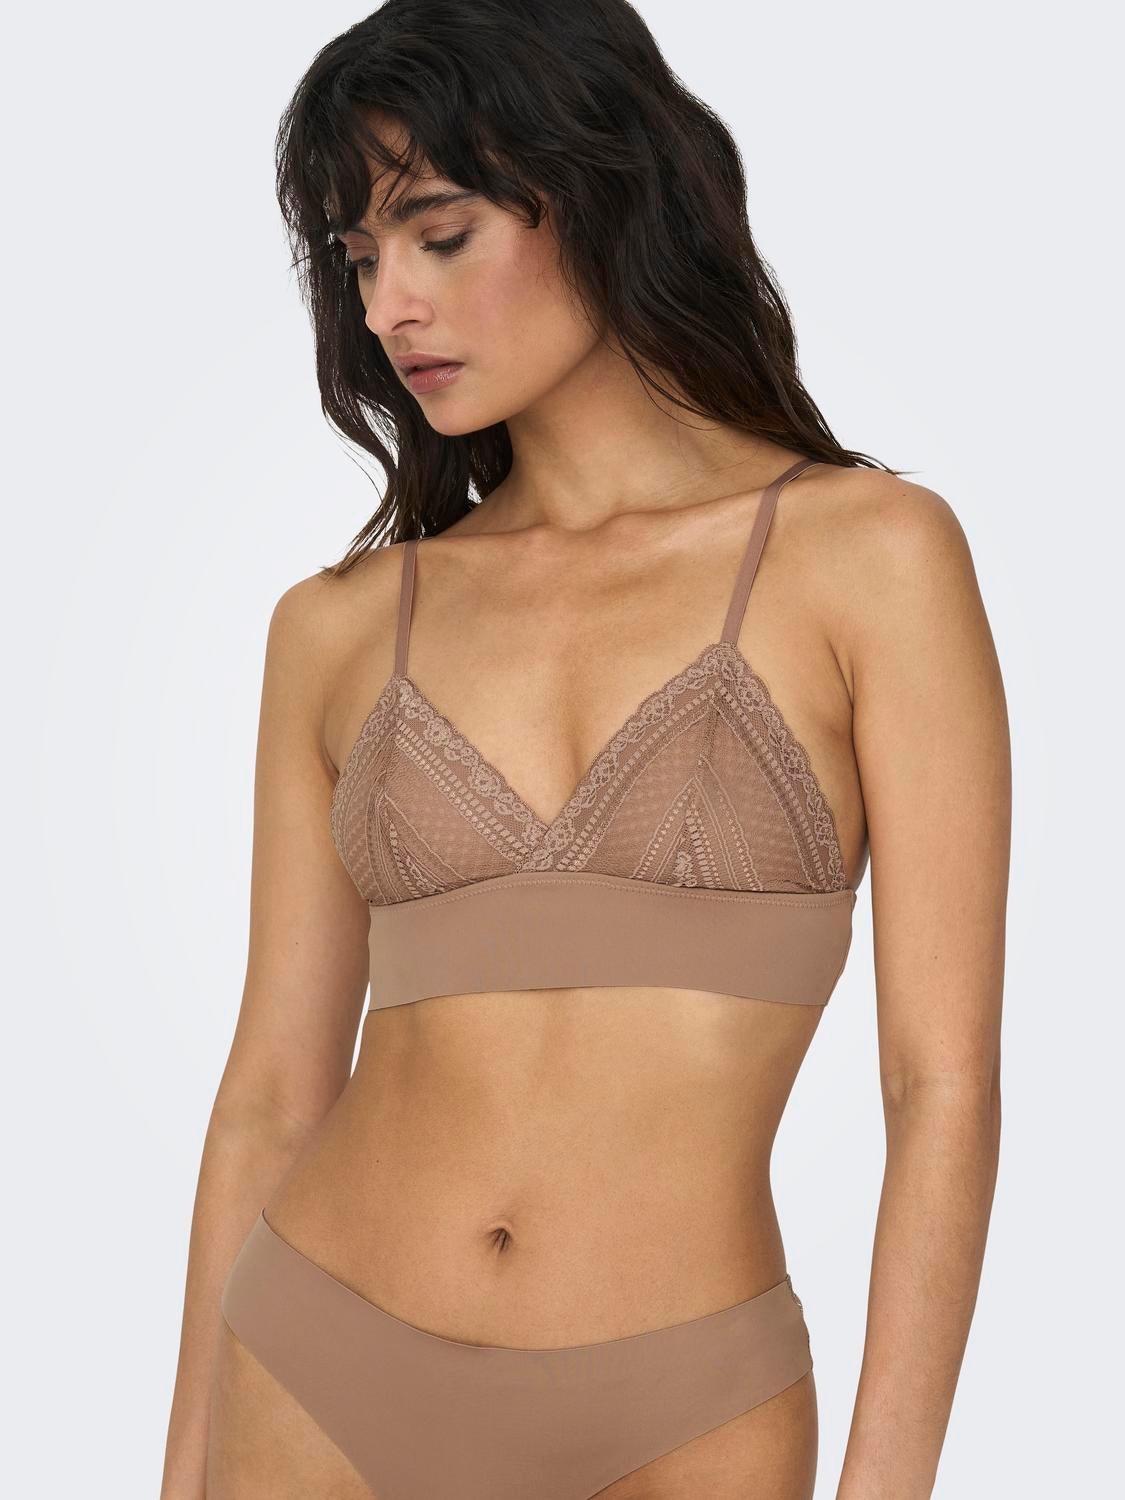 Datian 15245-5 Women's Taupe Beige Embroidered Underwired Padded Bra